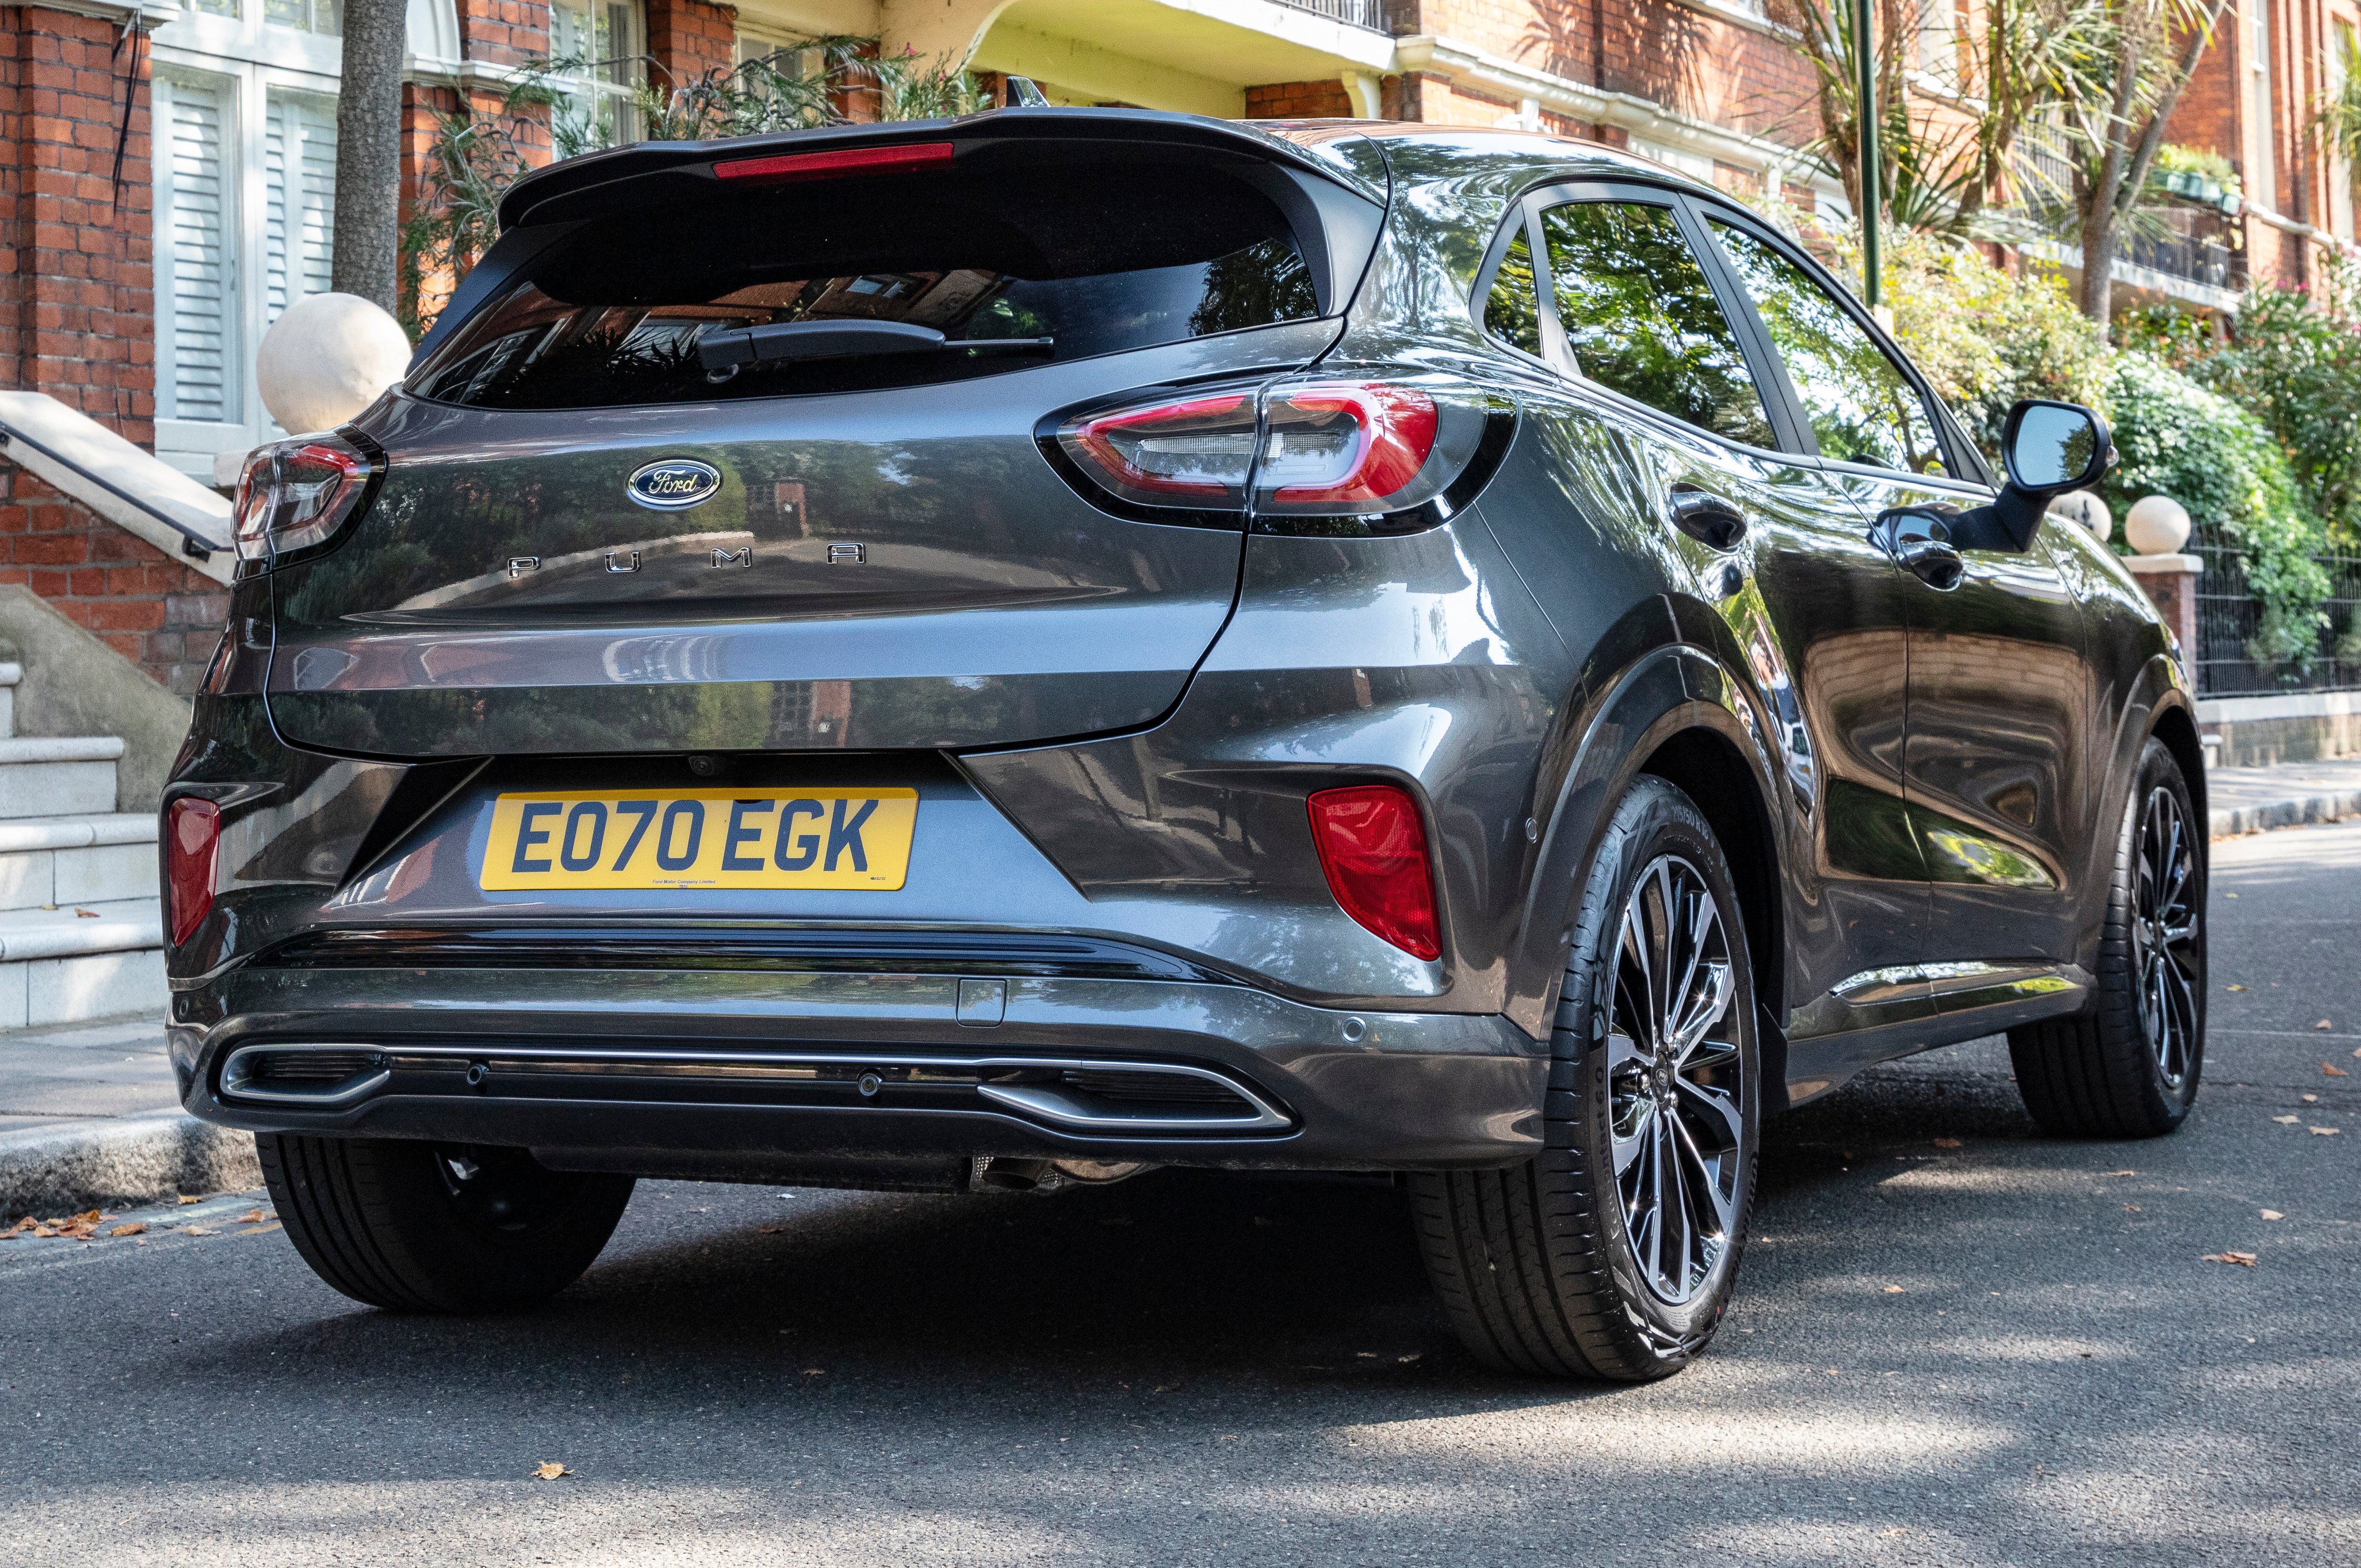 2020 Ford Puma: prices, engines, practicality, specs and release date